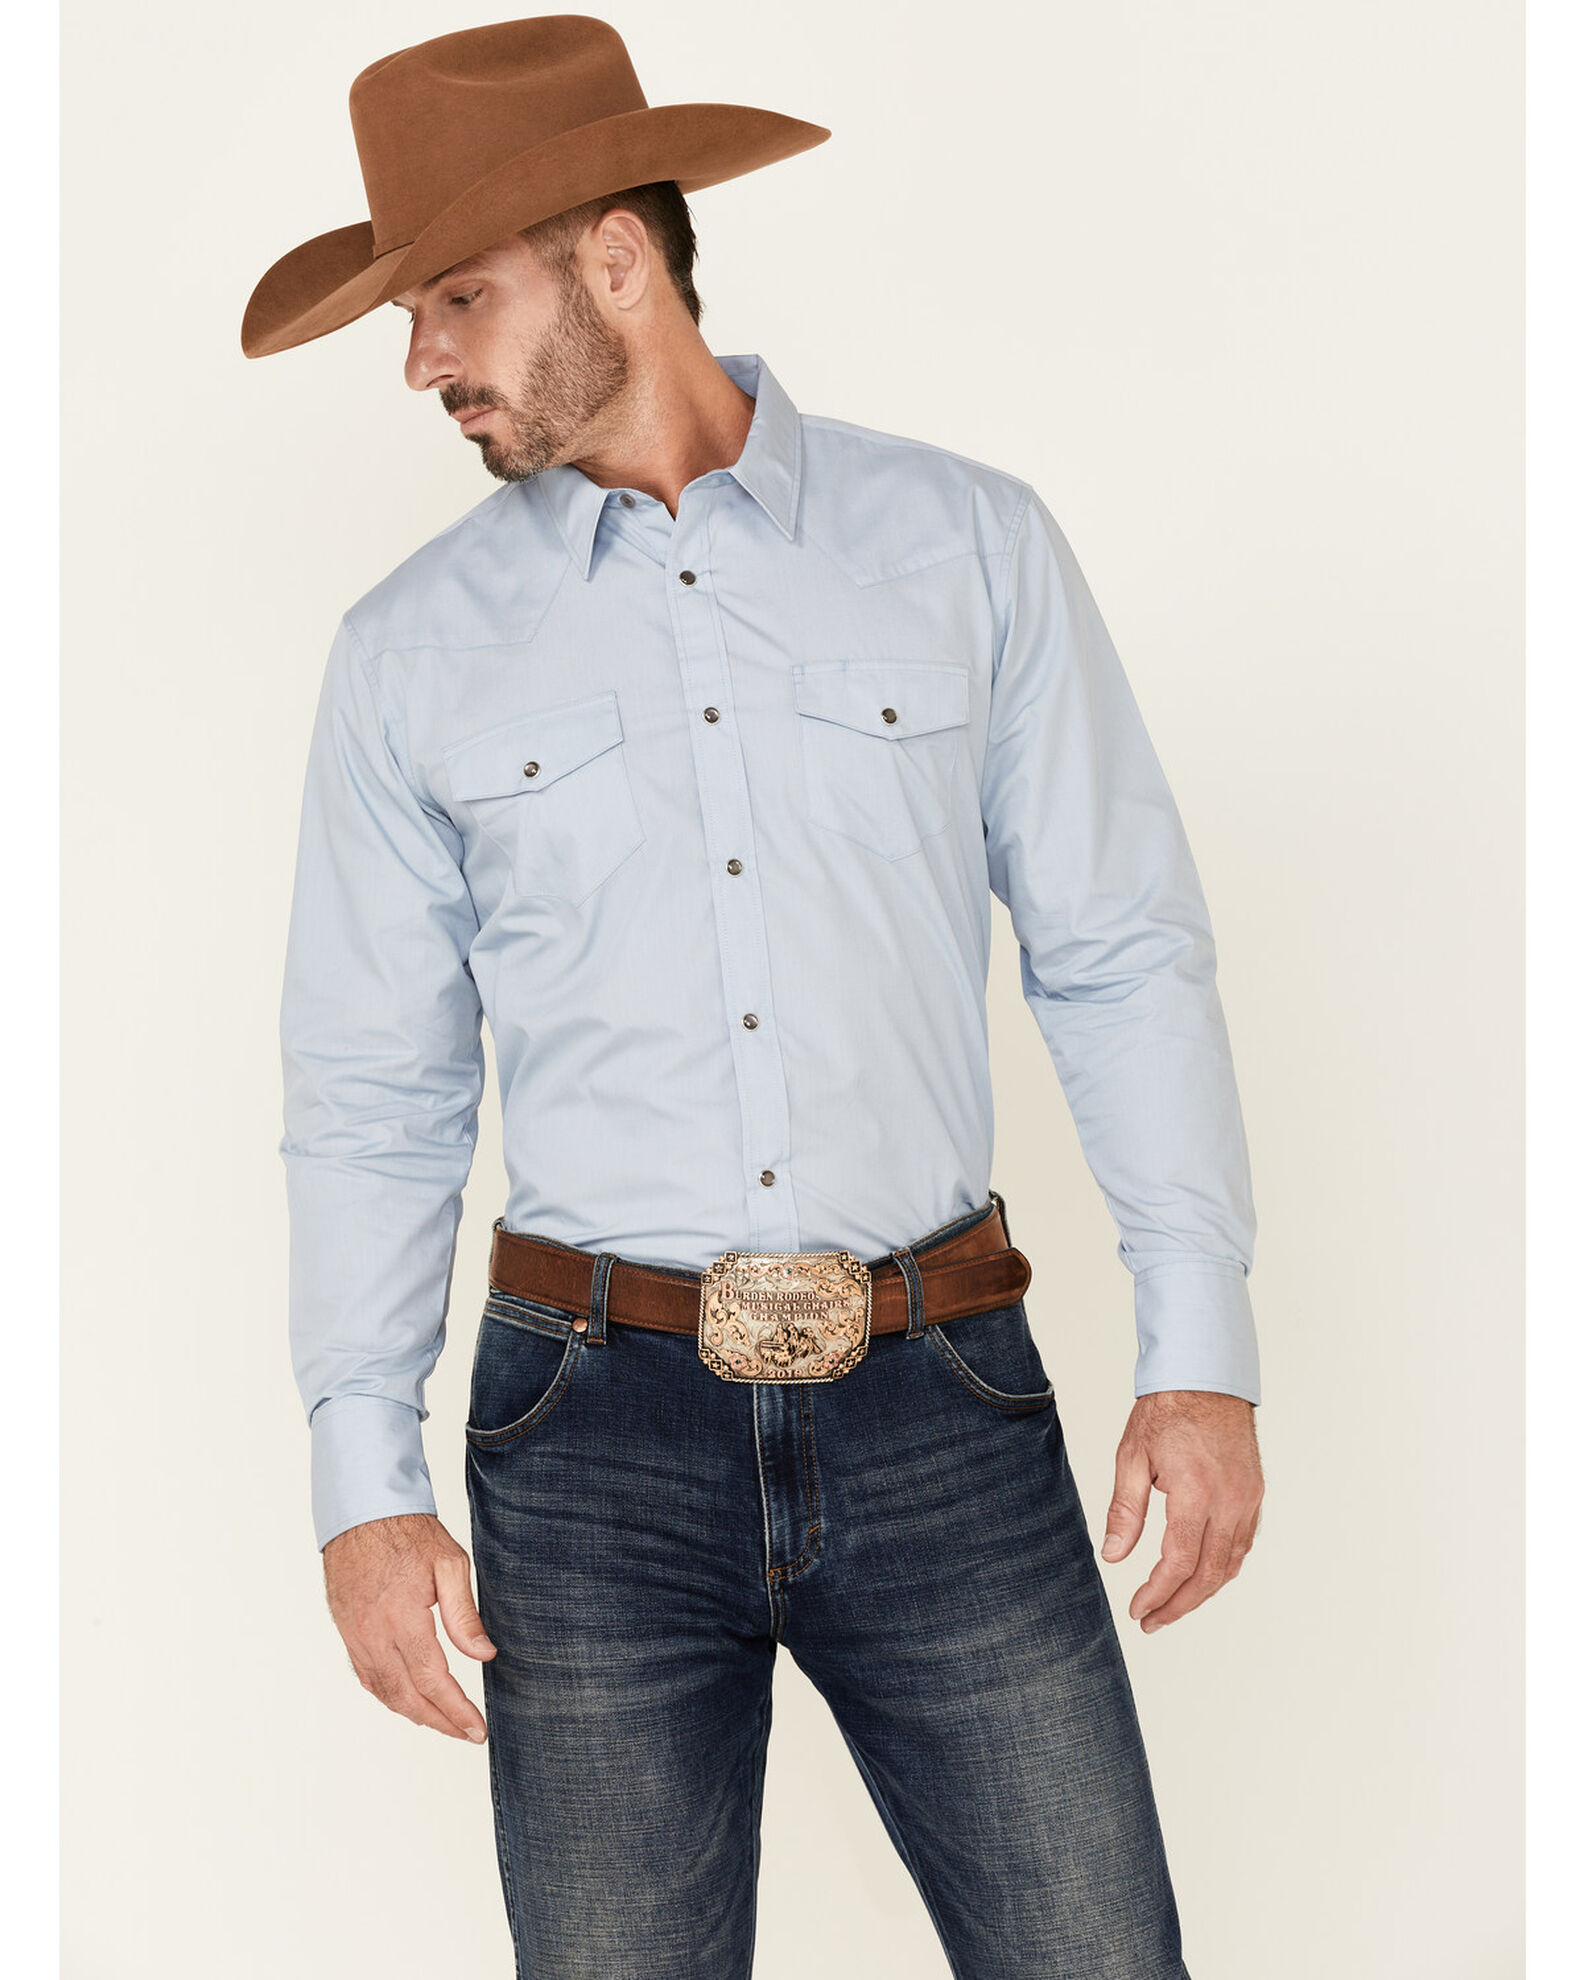 Product Name: Gibson Men's Basic Solid Long Sleeve Pearl Snap Western Shirt